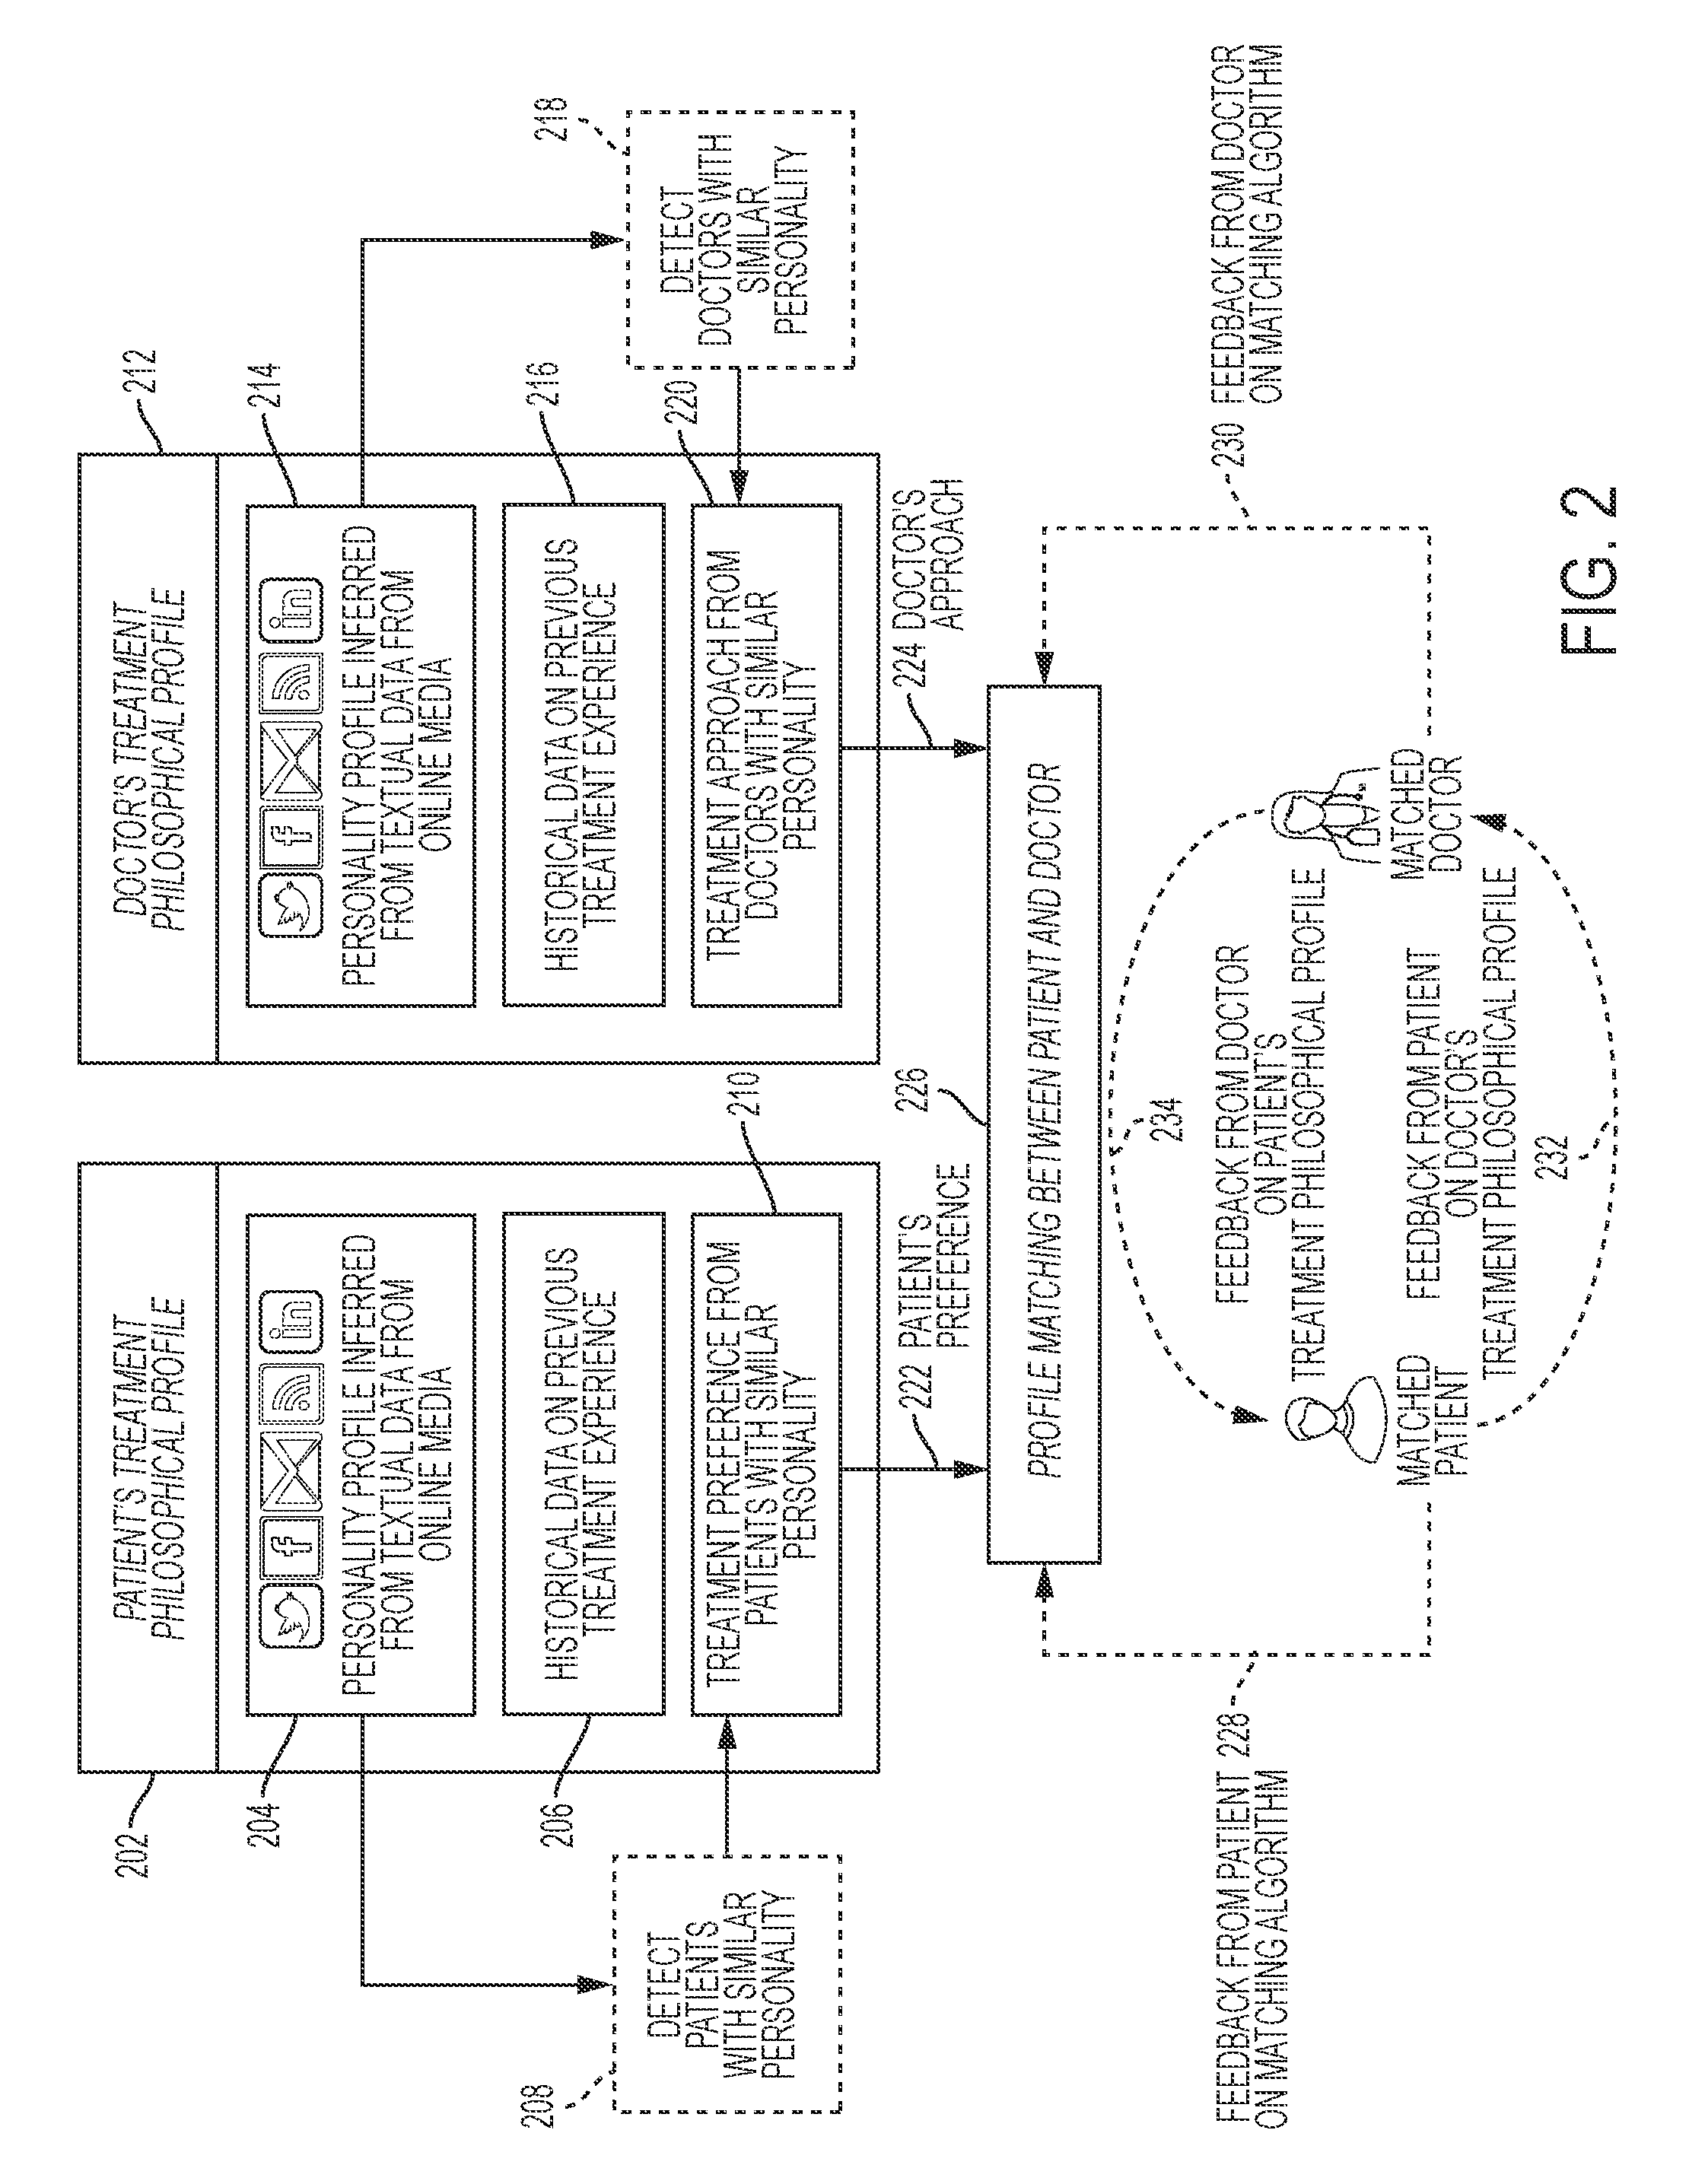 Machine training and search engine for providing specialized cognitive healthcare apparatus